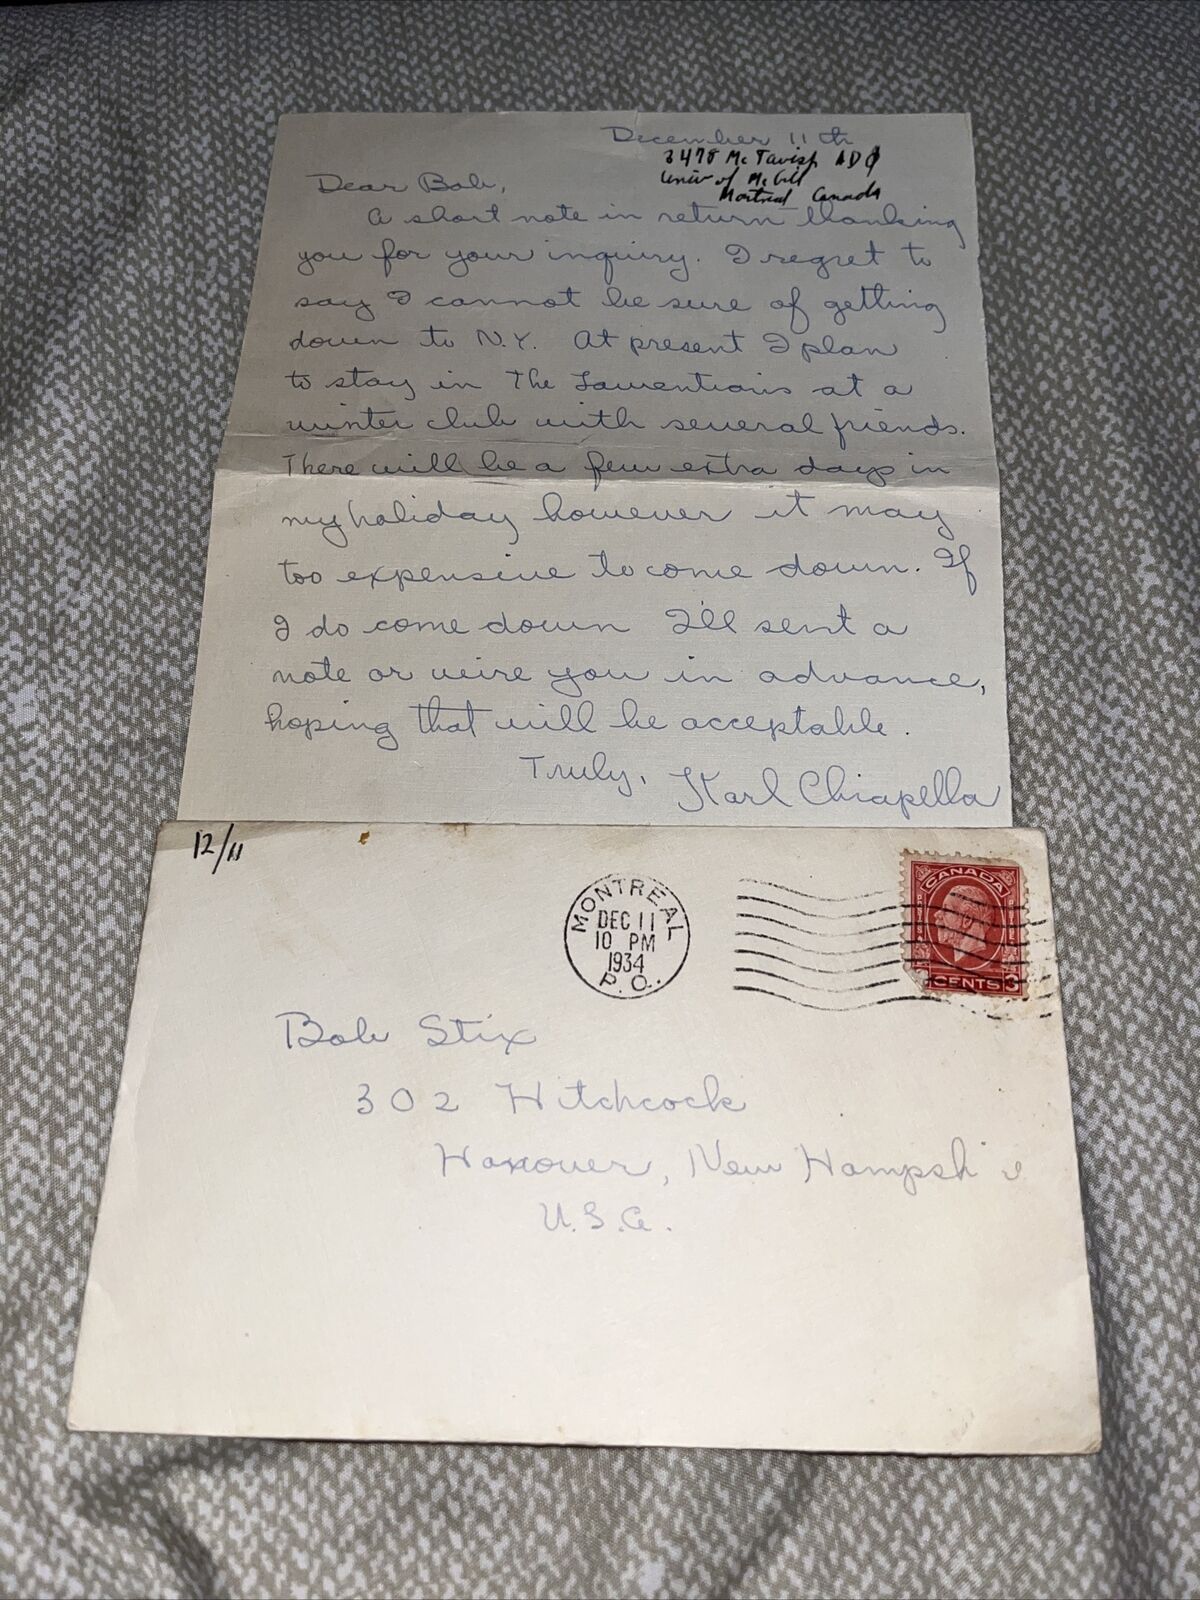 1934 Depression Era Student Letter from McGill University to Dartmouth College